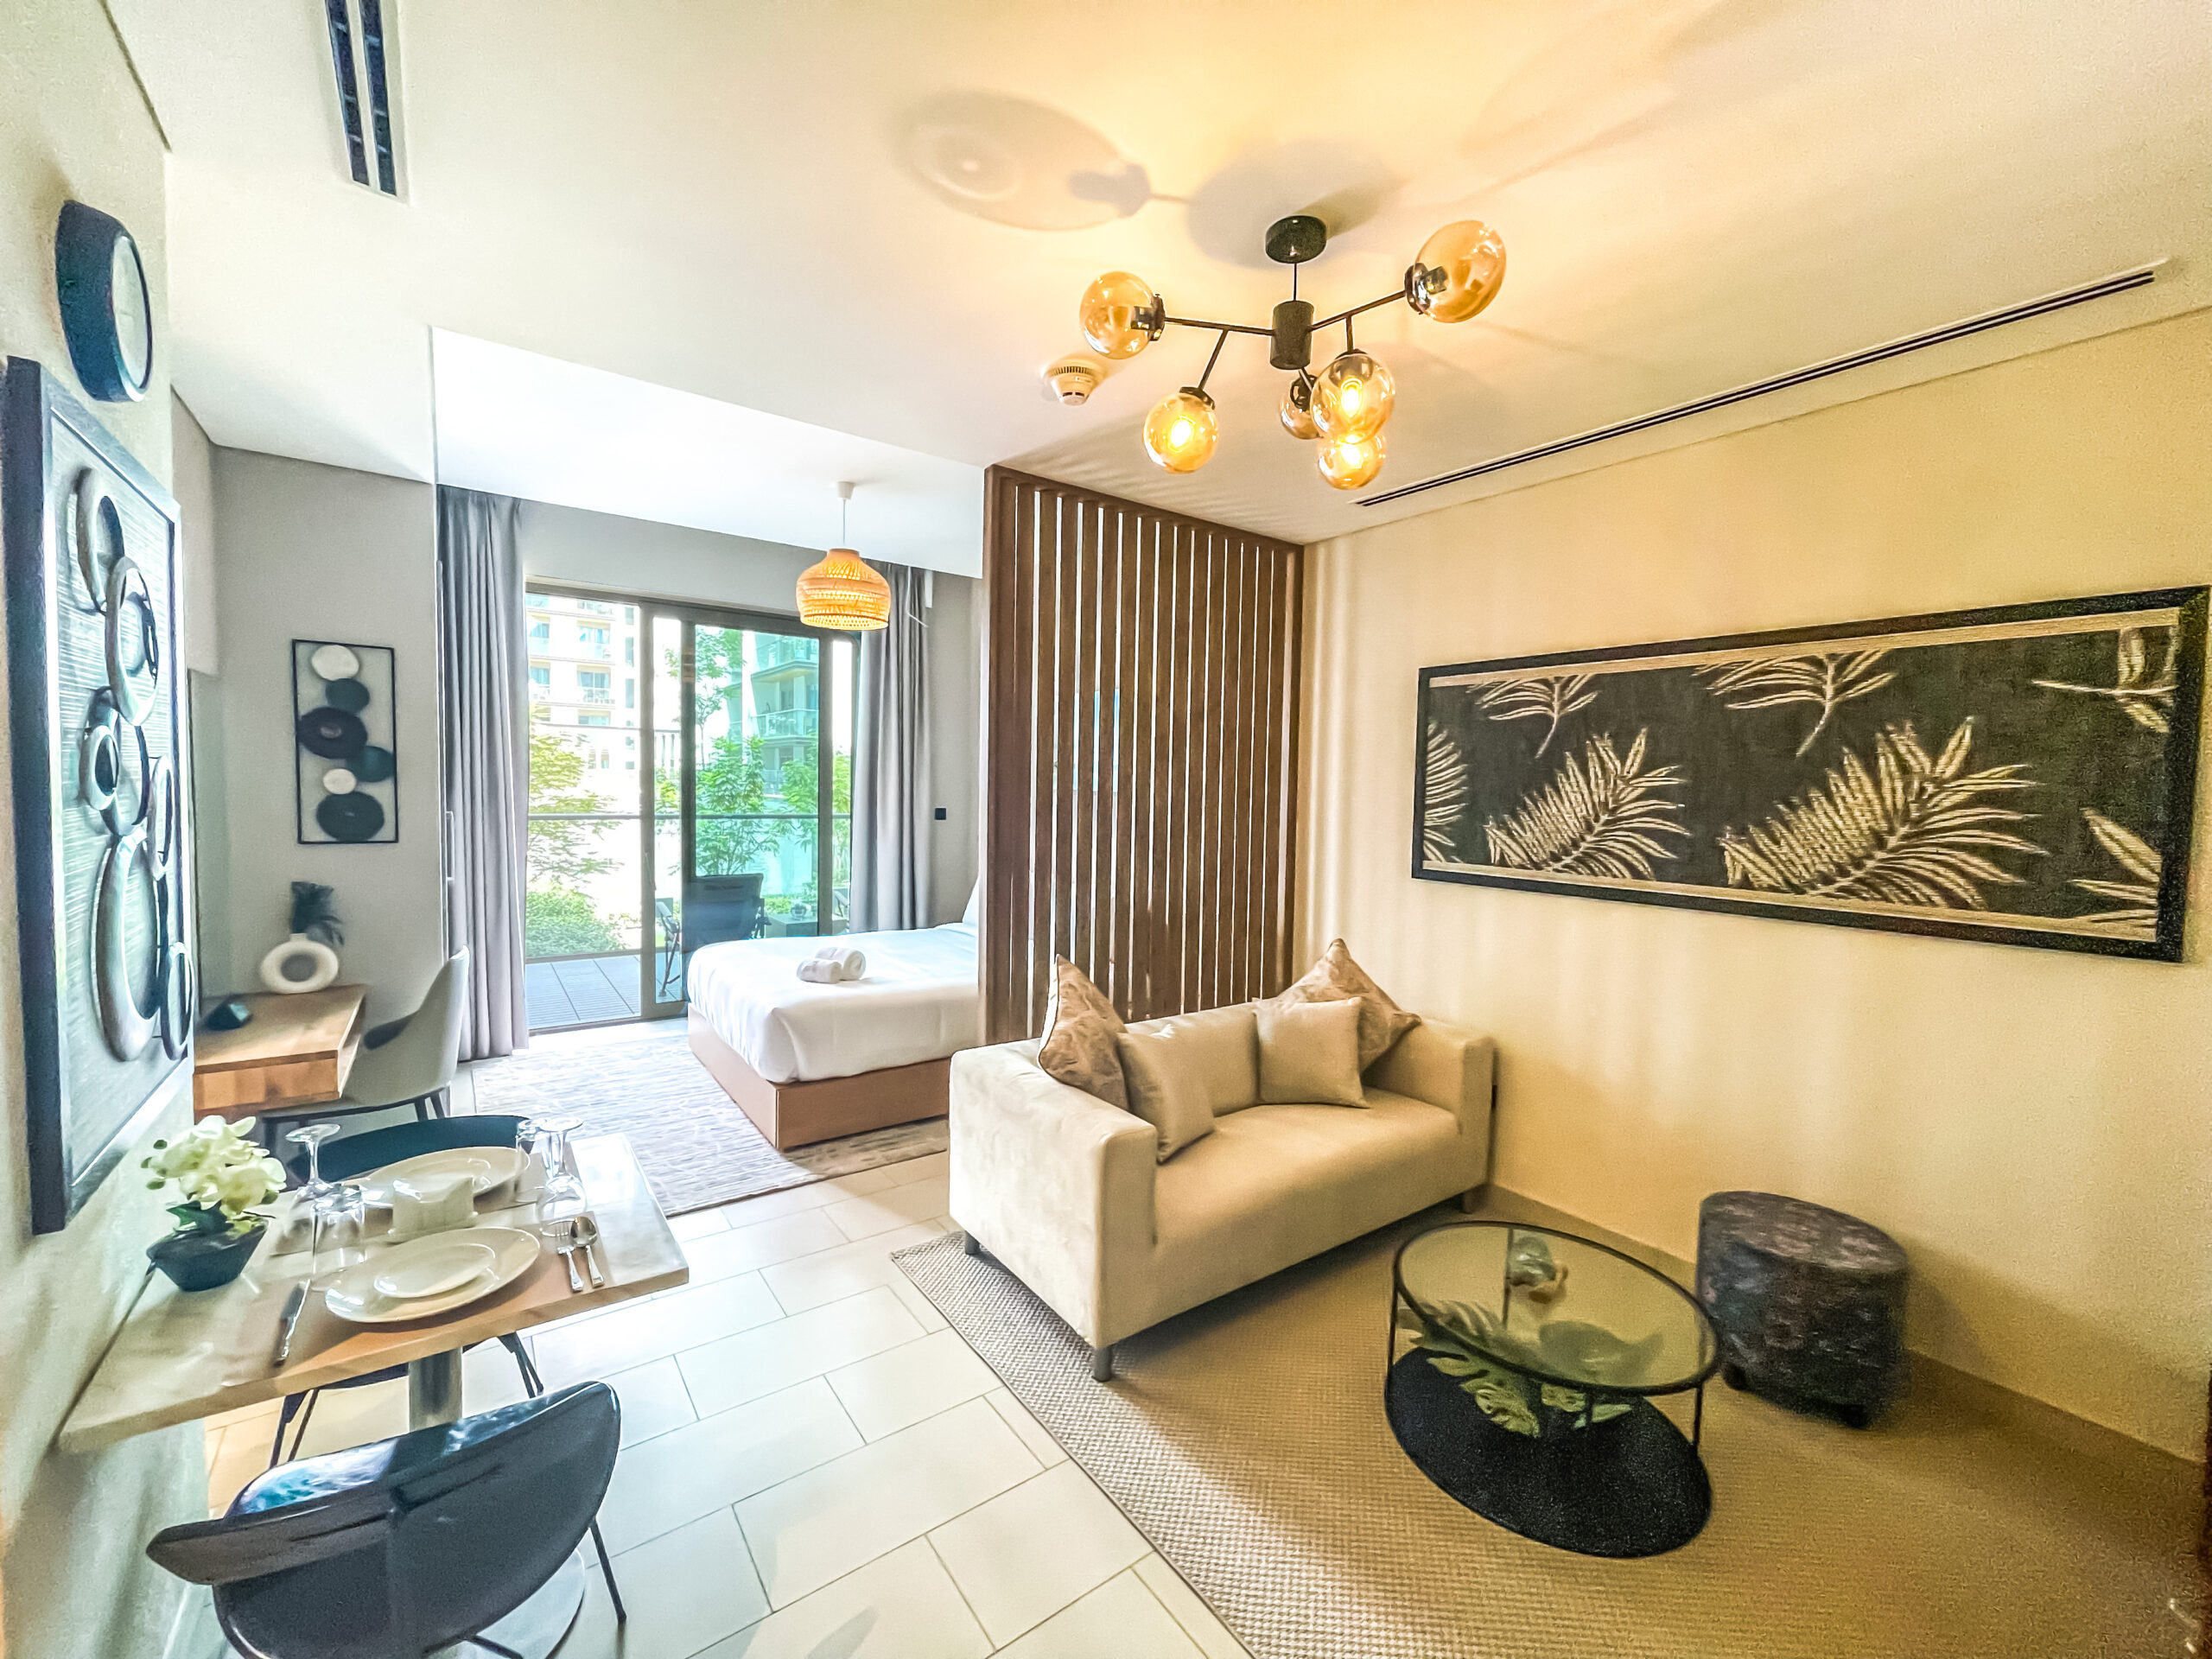 Experience Luxury Getaways: Holiday Rental Homes in Dubai for Your Dream Vacation